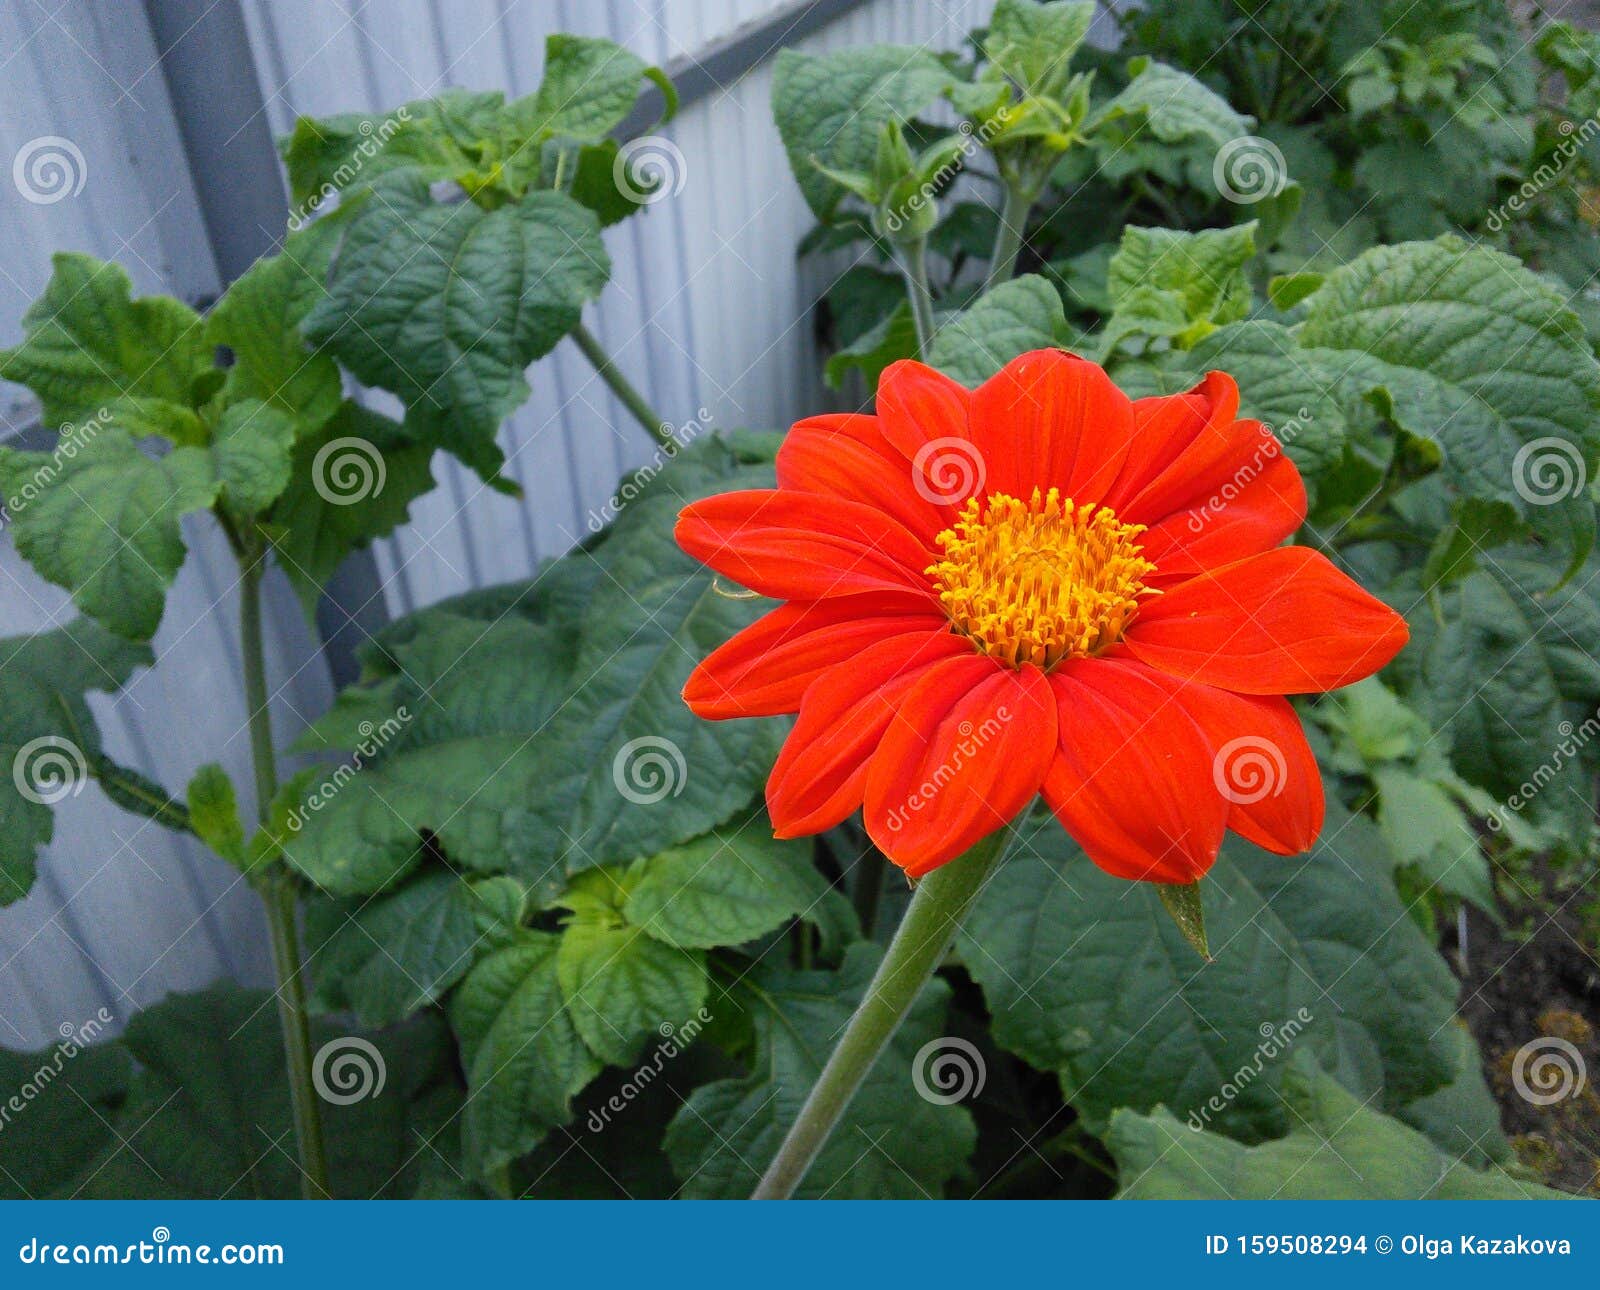 Tithonia Flower Mexican Sunflower Yellow Center Stock Photo Image Of Beauty Nature 159508294